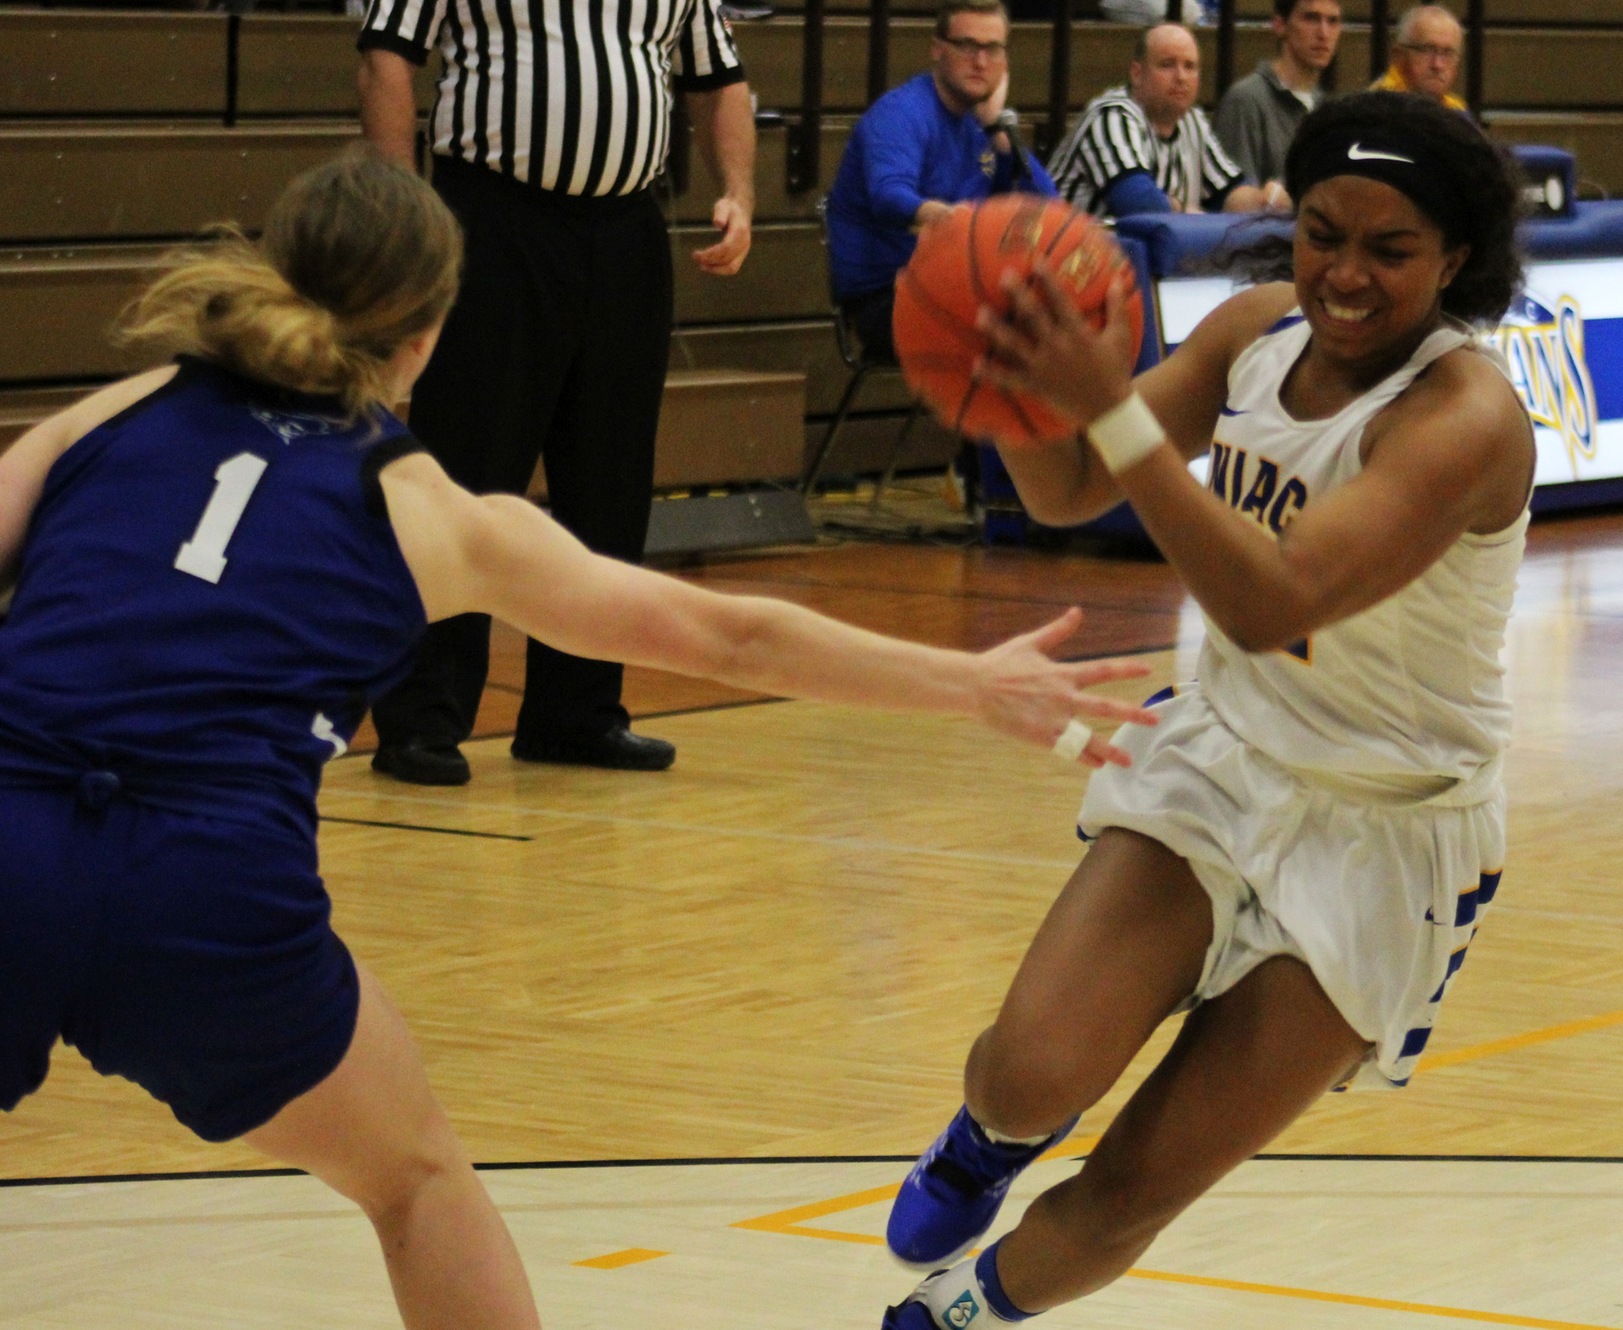 NIACC's Sierra Lynch drives to the basket during last season's non-league game against Iowa Western.